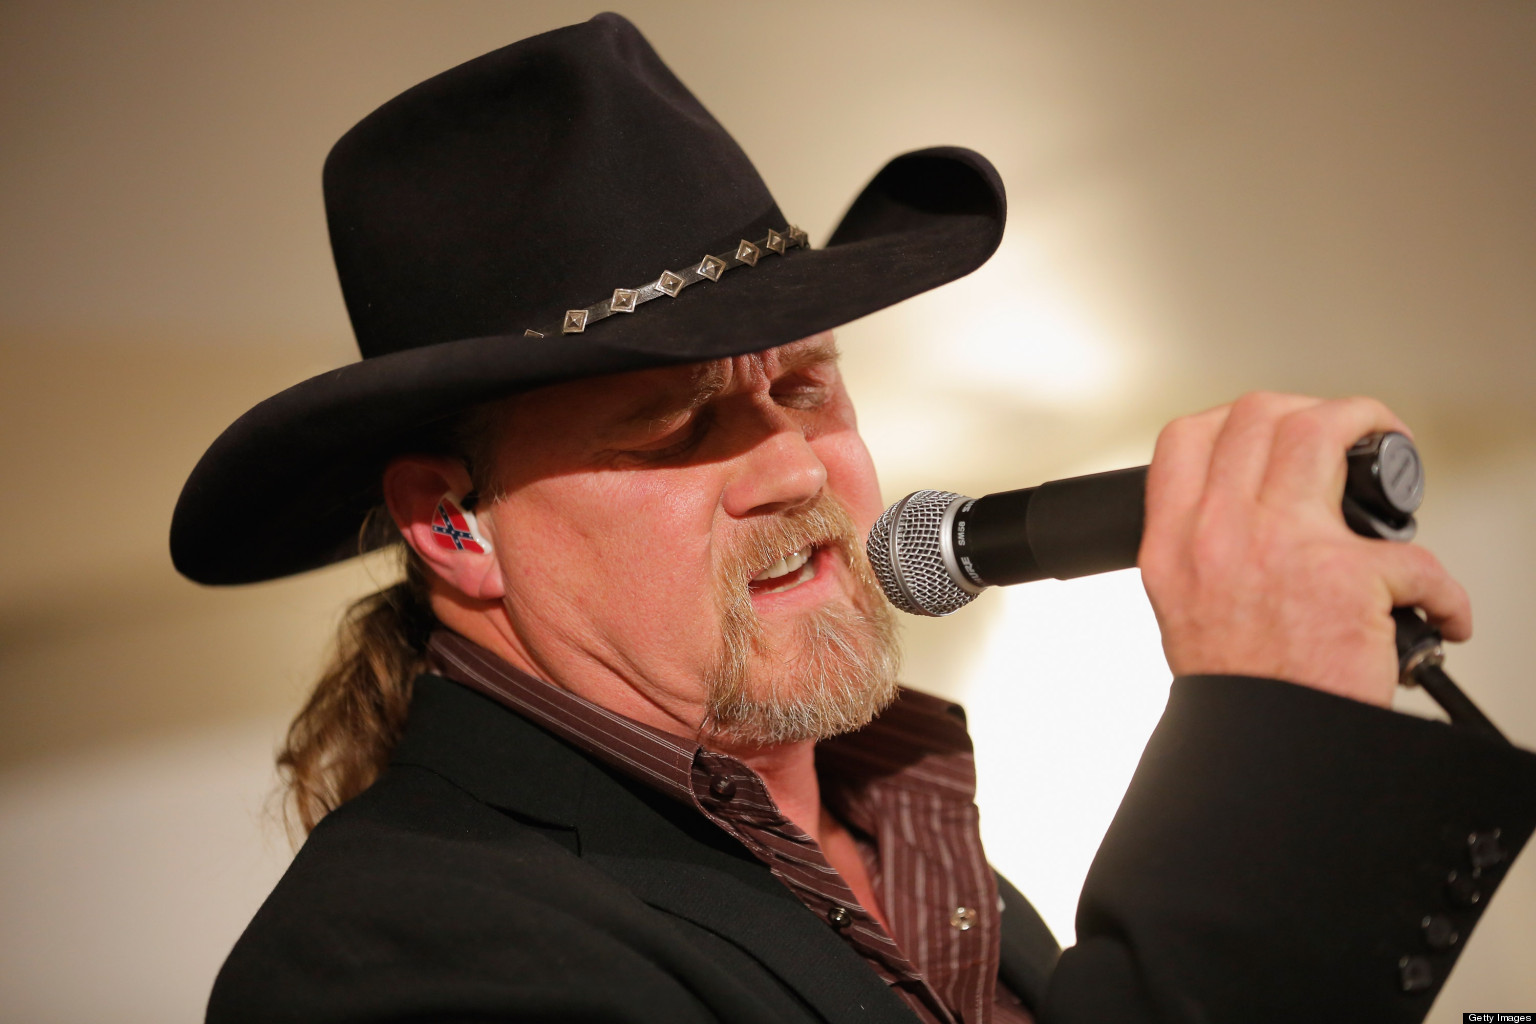 More Pictures Of Trace Adkins. 